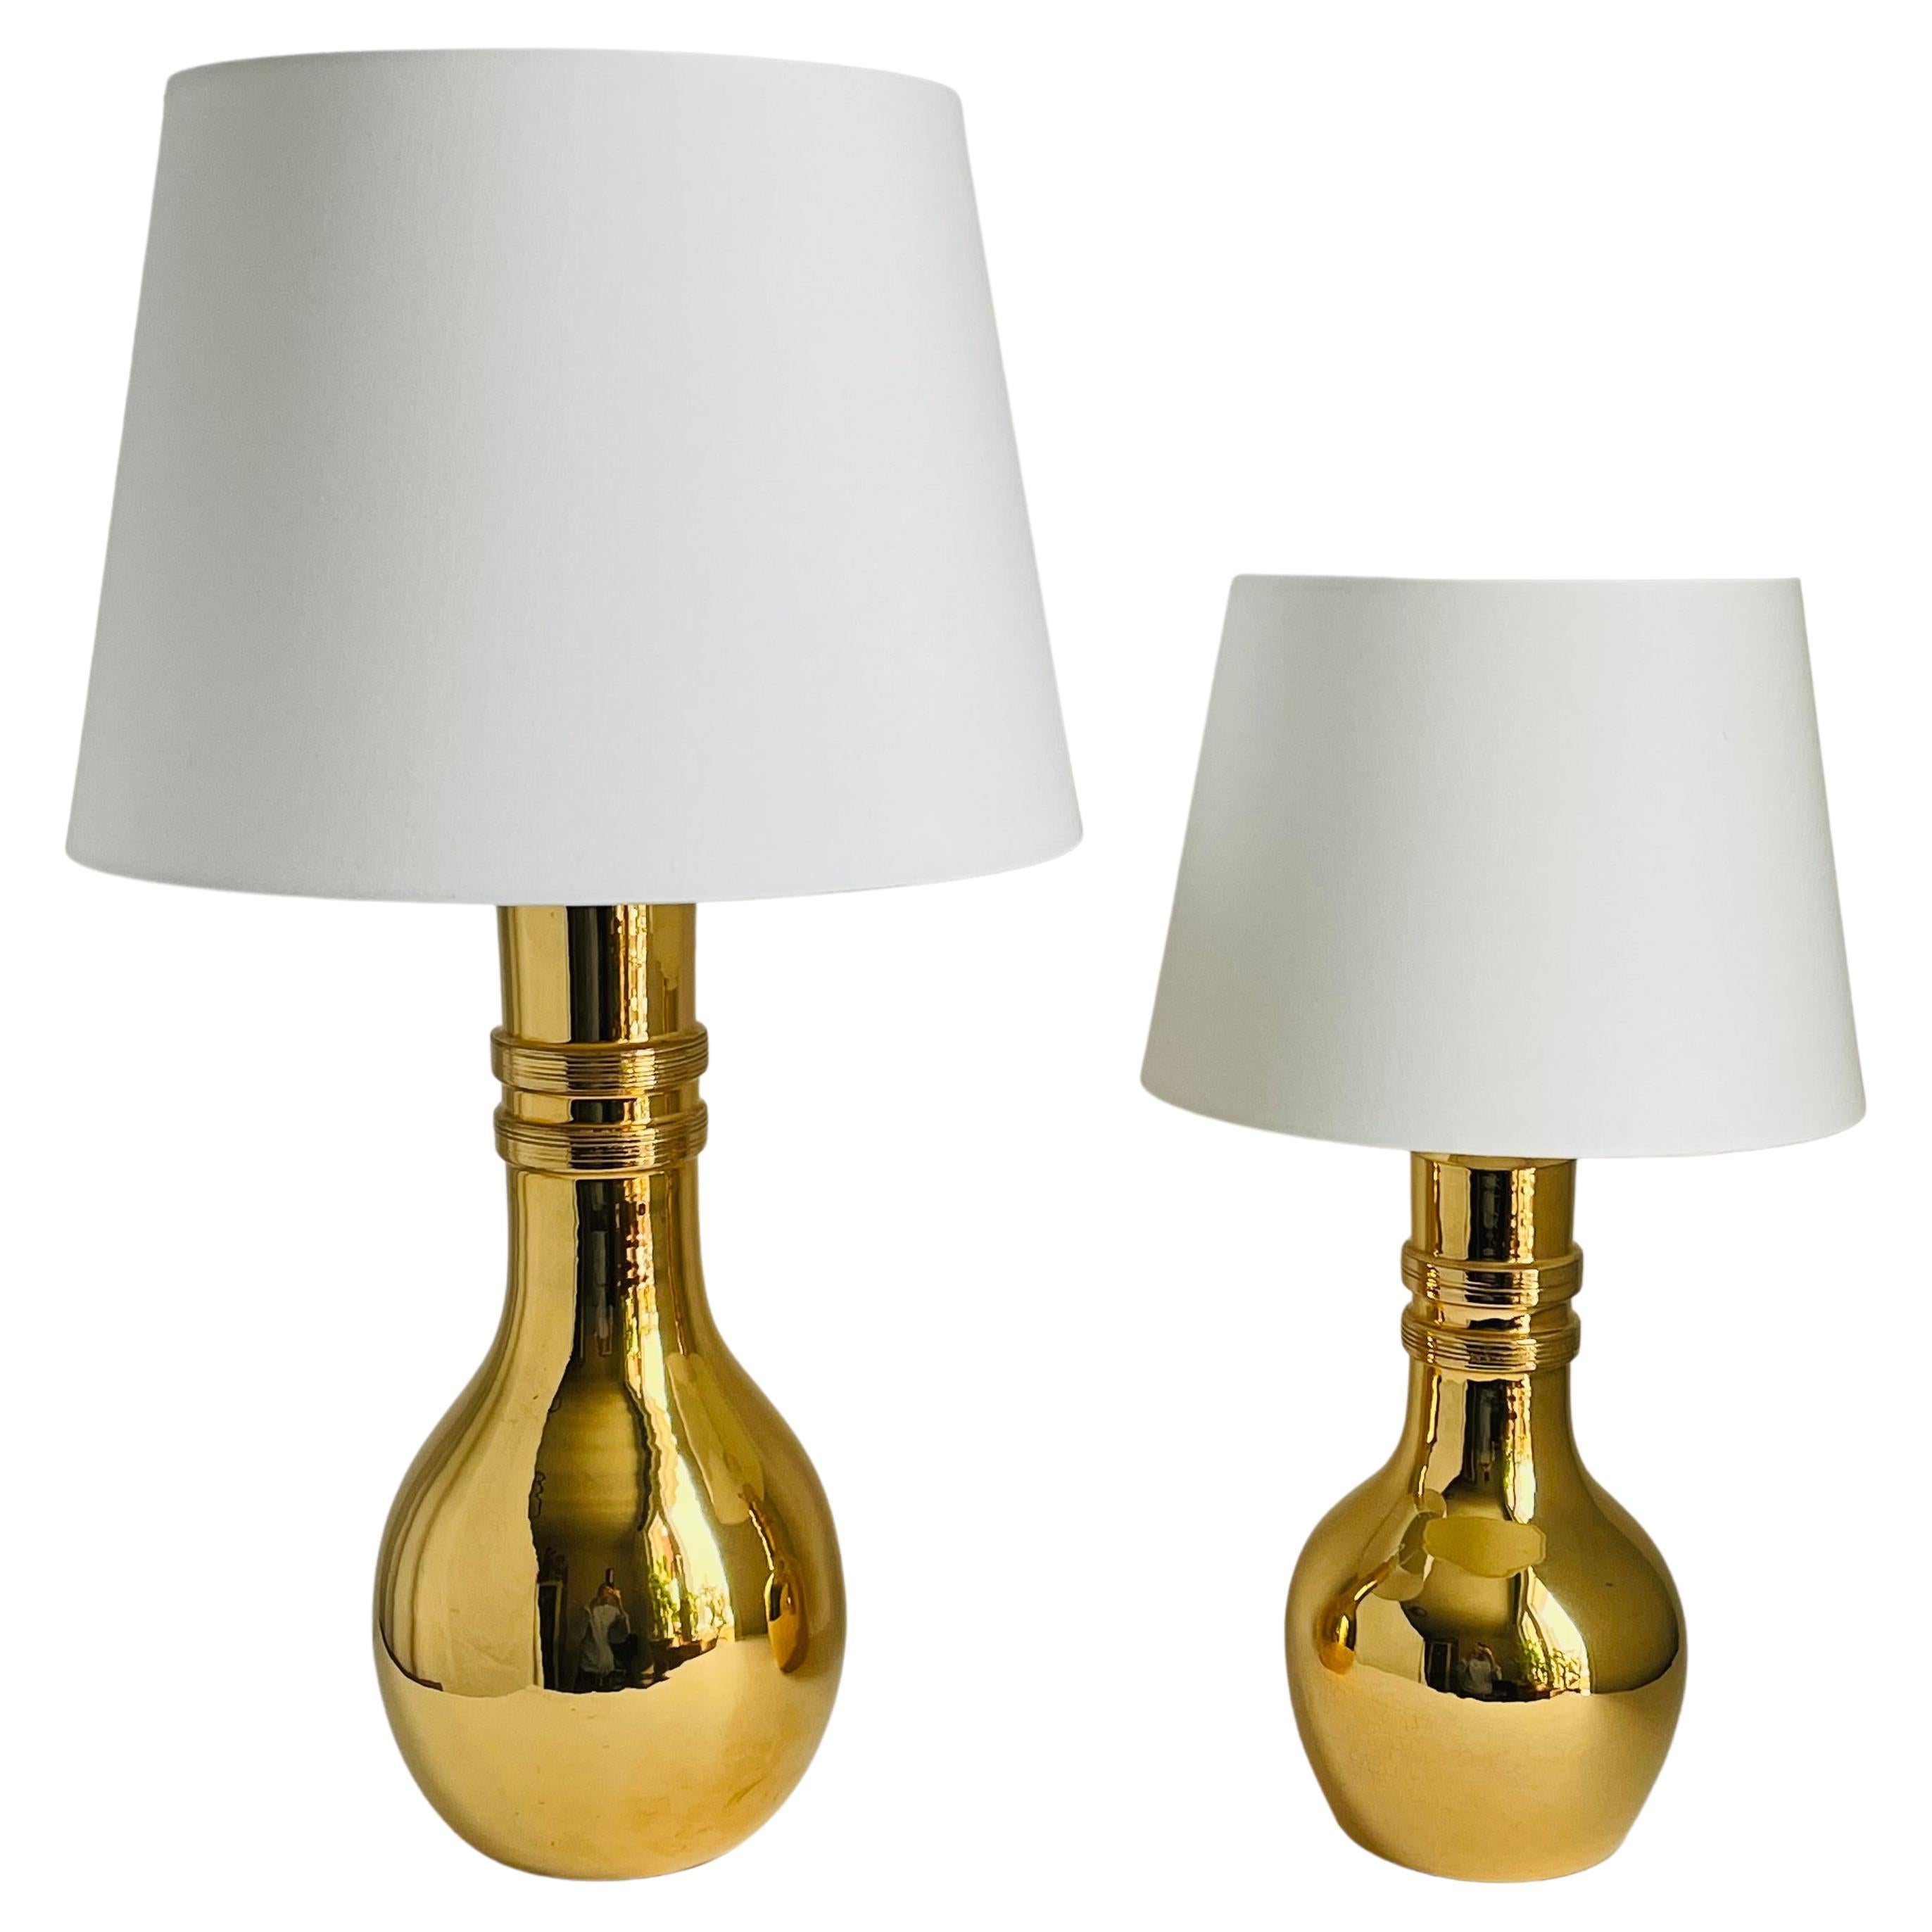 Two Bitossi Table Lamps by Aldo Londi, Gold Glazed Ceramic, Italy, 1970s For Sale